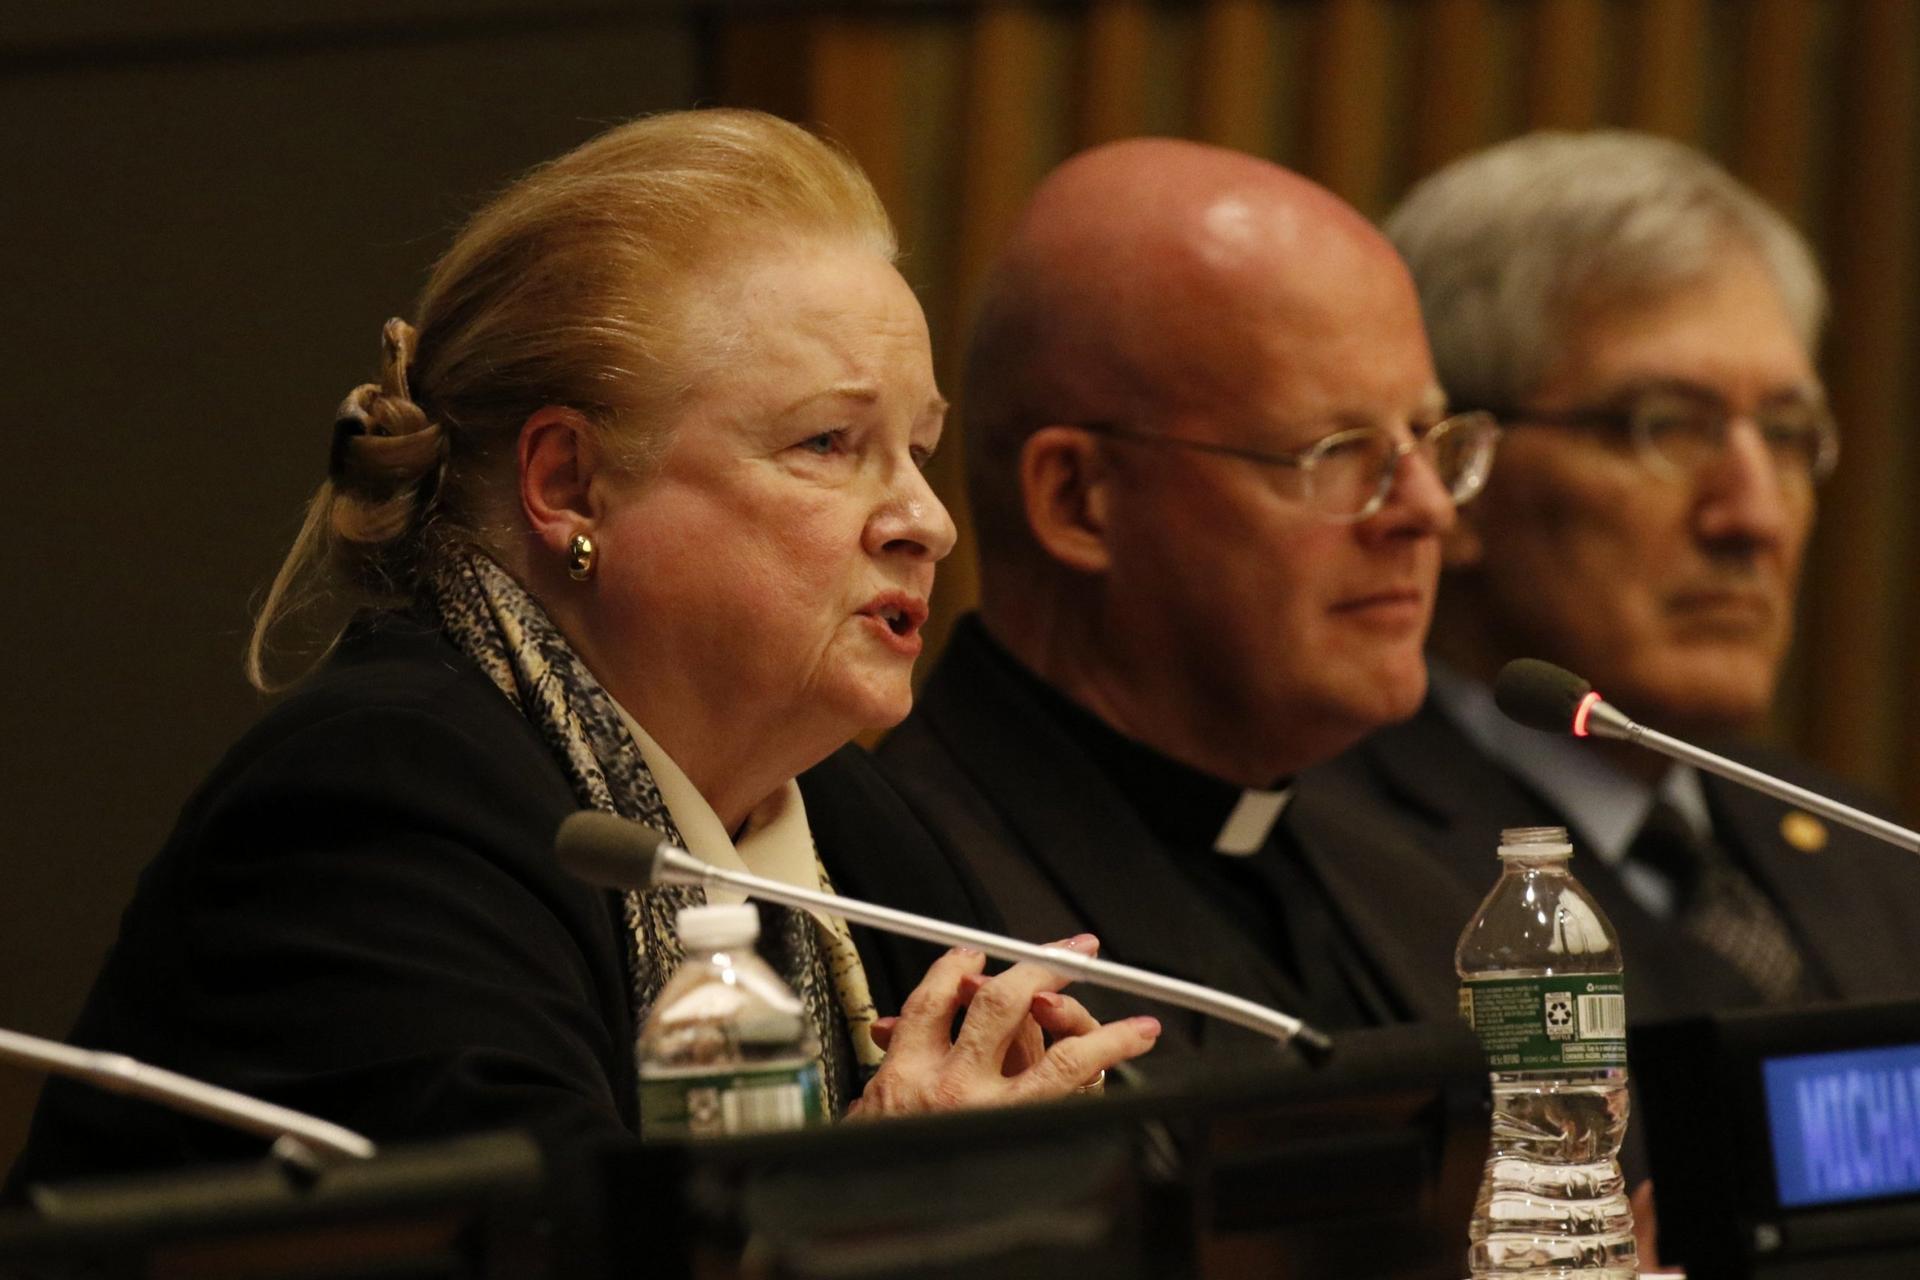 ‘Catholics are like the leaven in the loaf’ of U.N.’s work, says Glendon